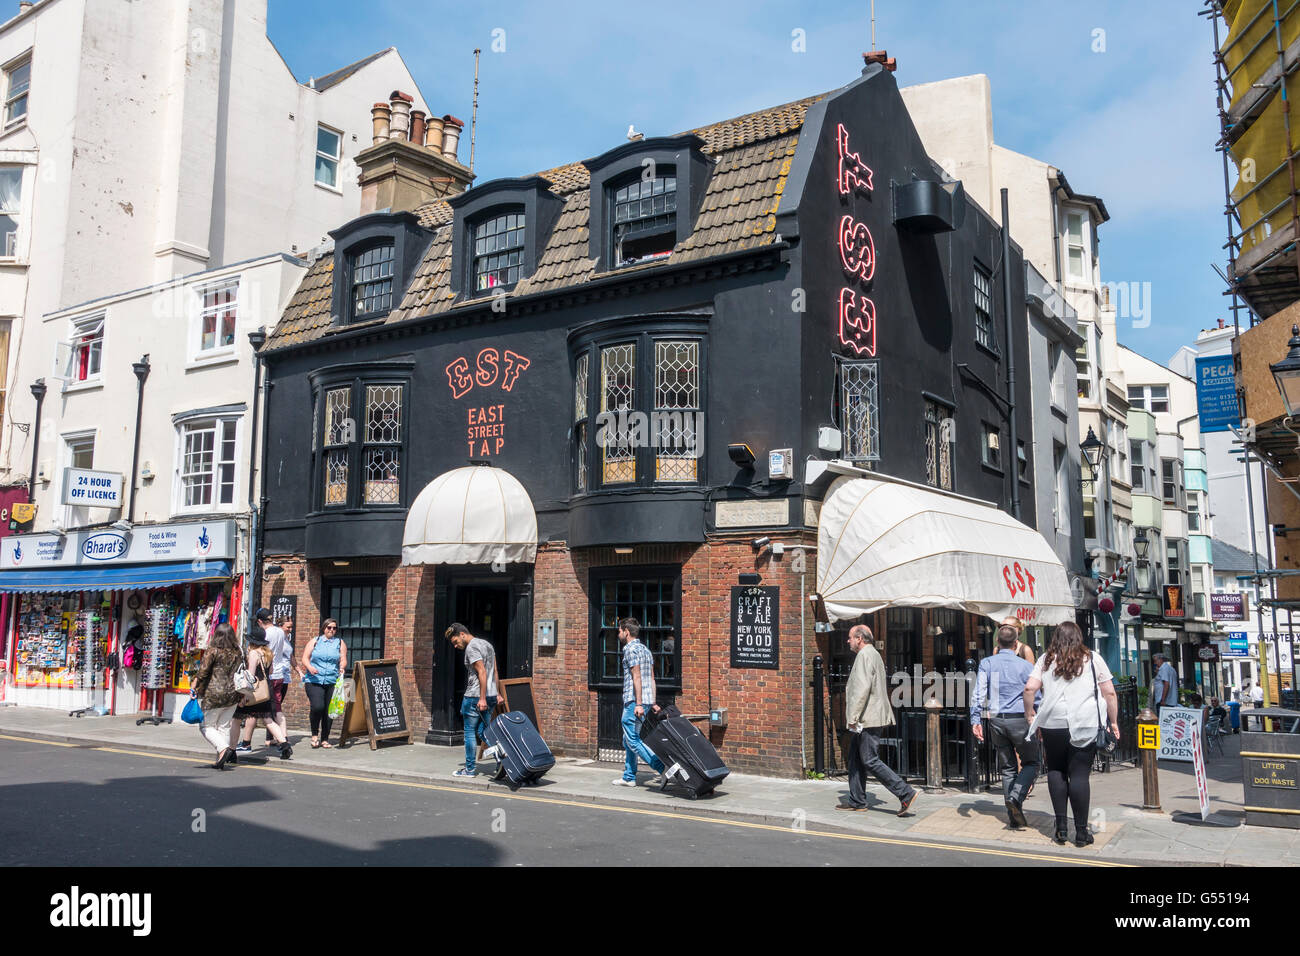 EST East Street Tap Craft Beer and Ale Shop Pub Brighton Sussex England Stock Photo